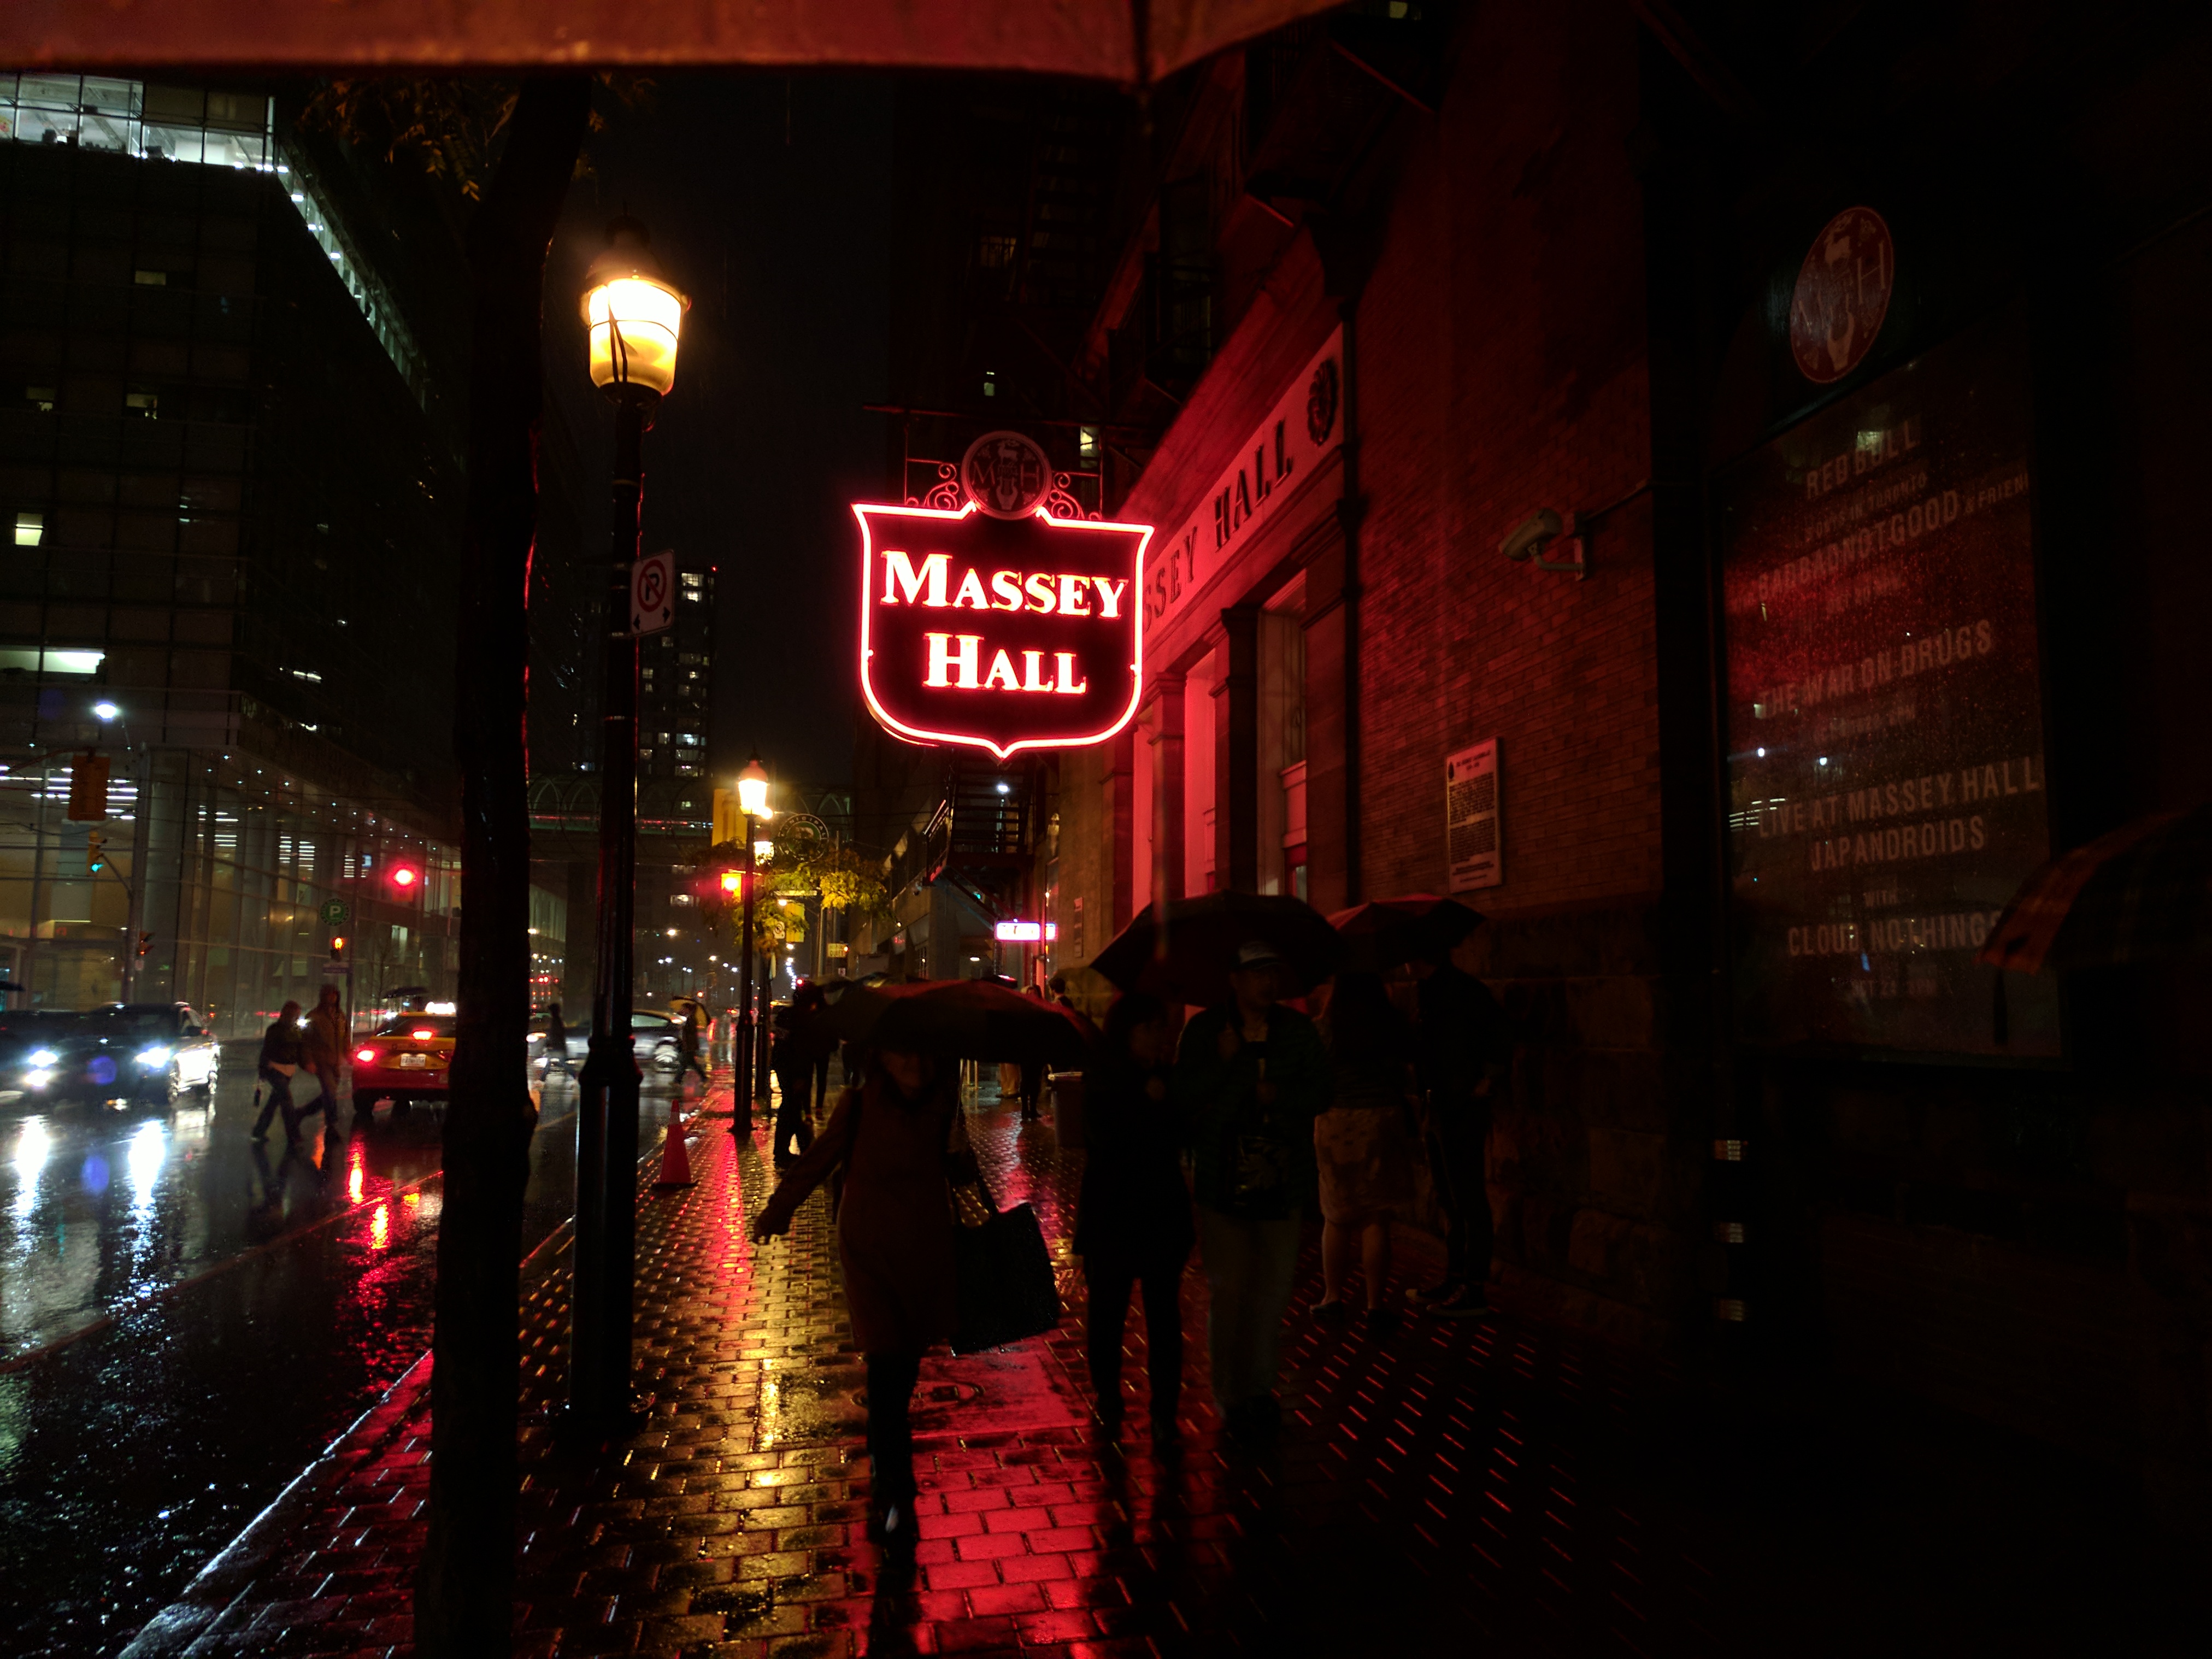 Massey Hall from outside, illuminated in red neon. There are reflections from all the wet.